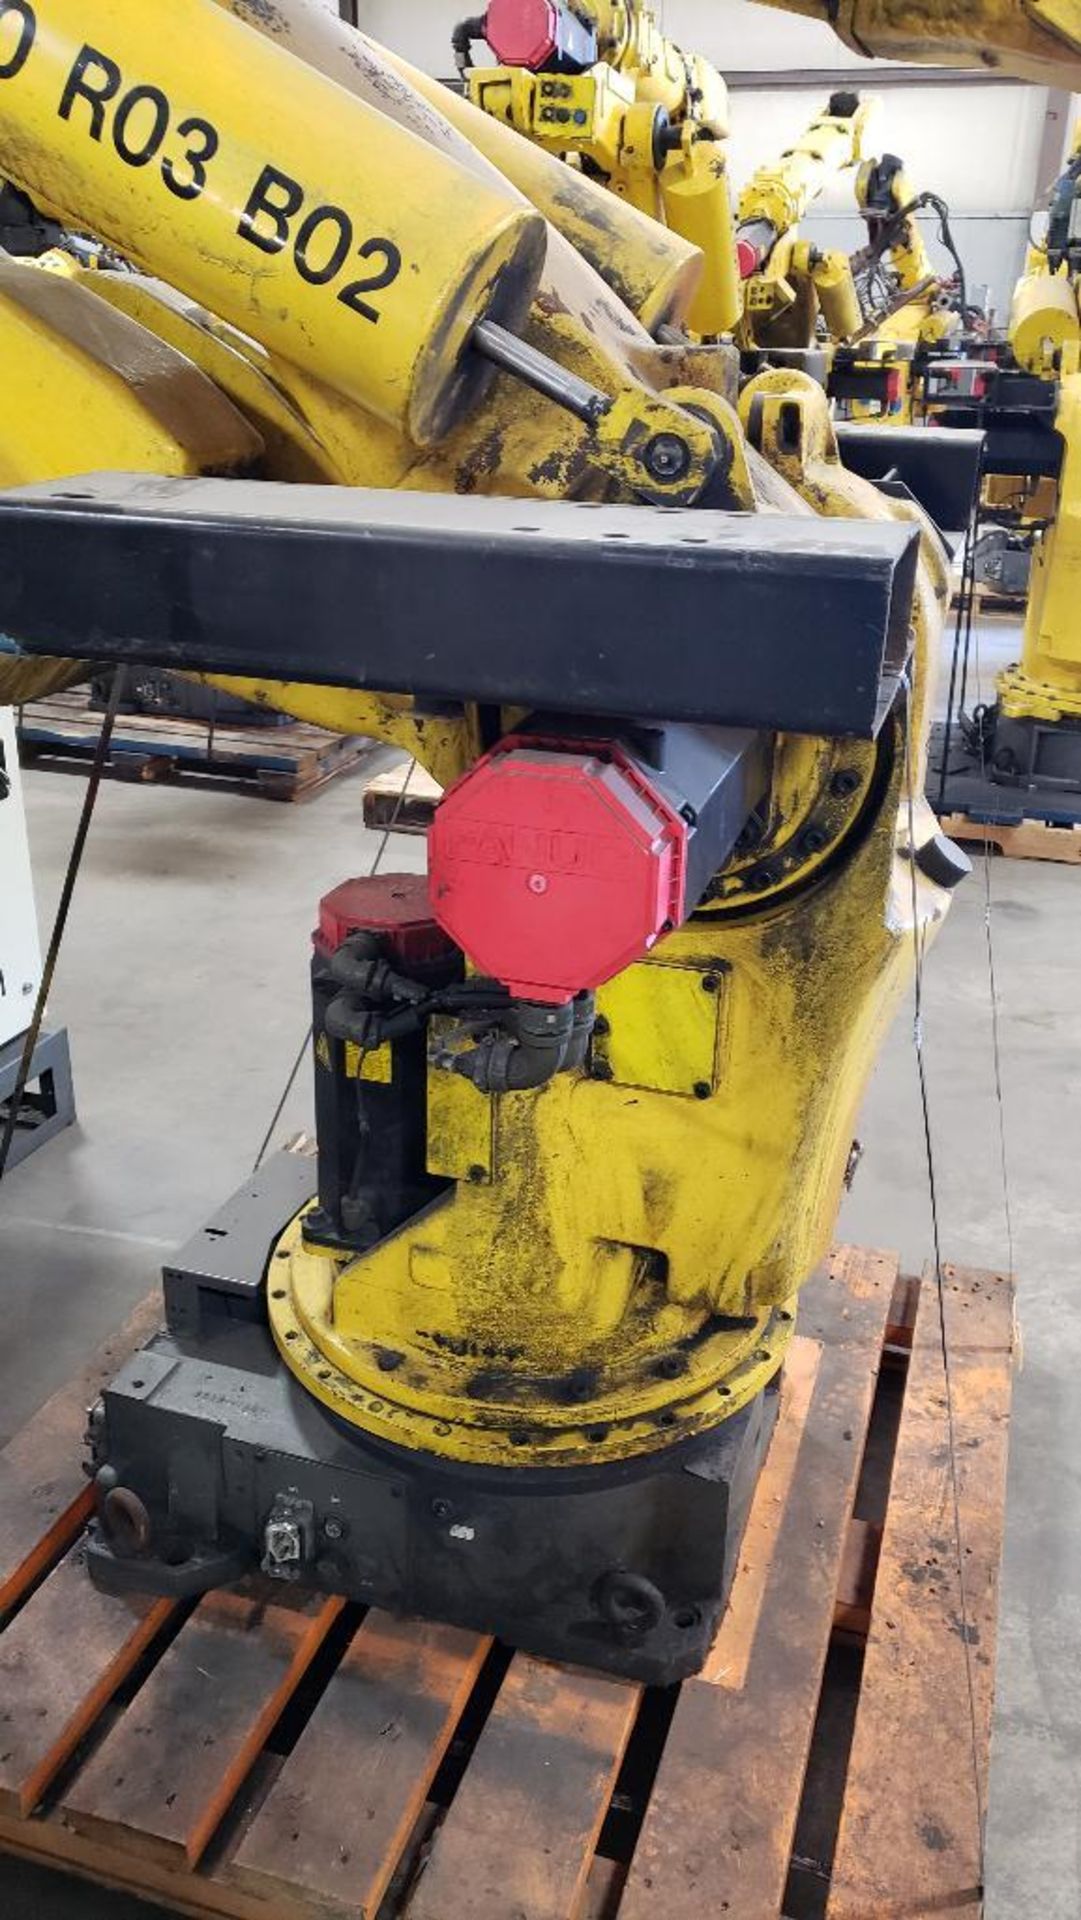 Fanuc S-420iW robot with R-J2 controller. - Image 12 of 15